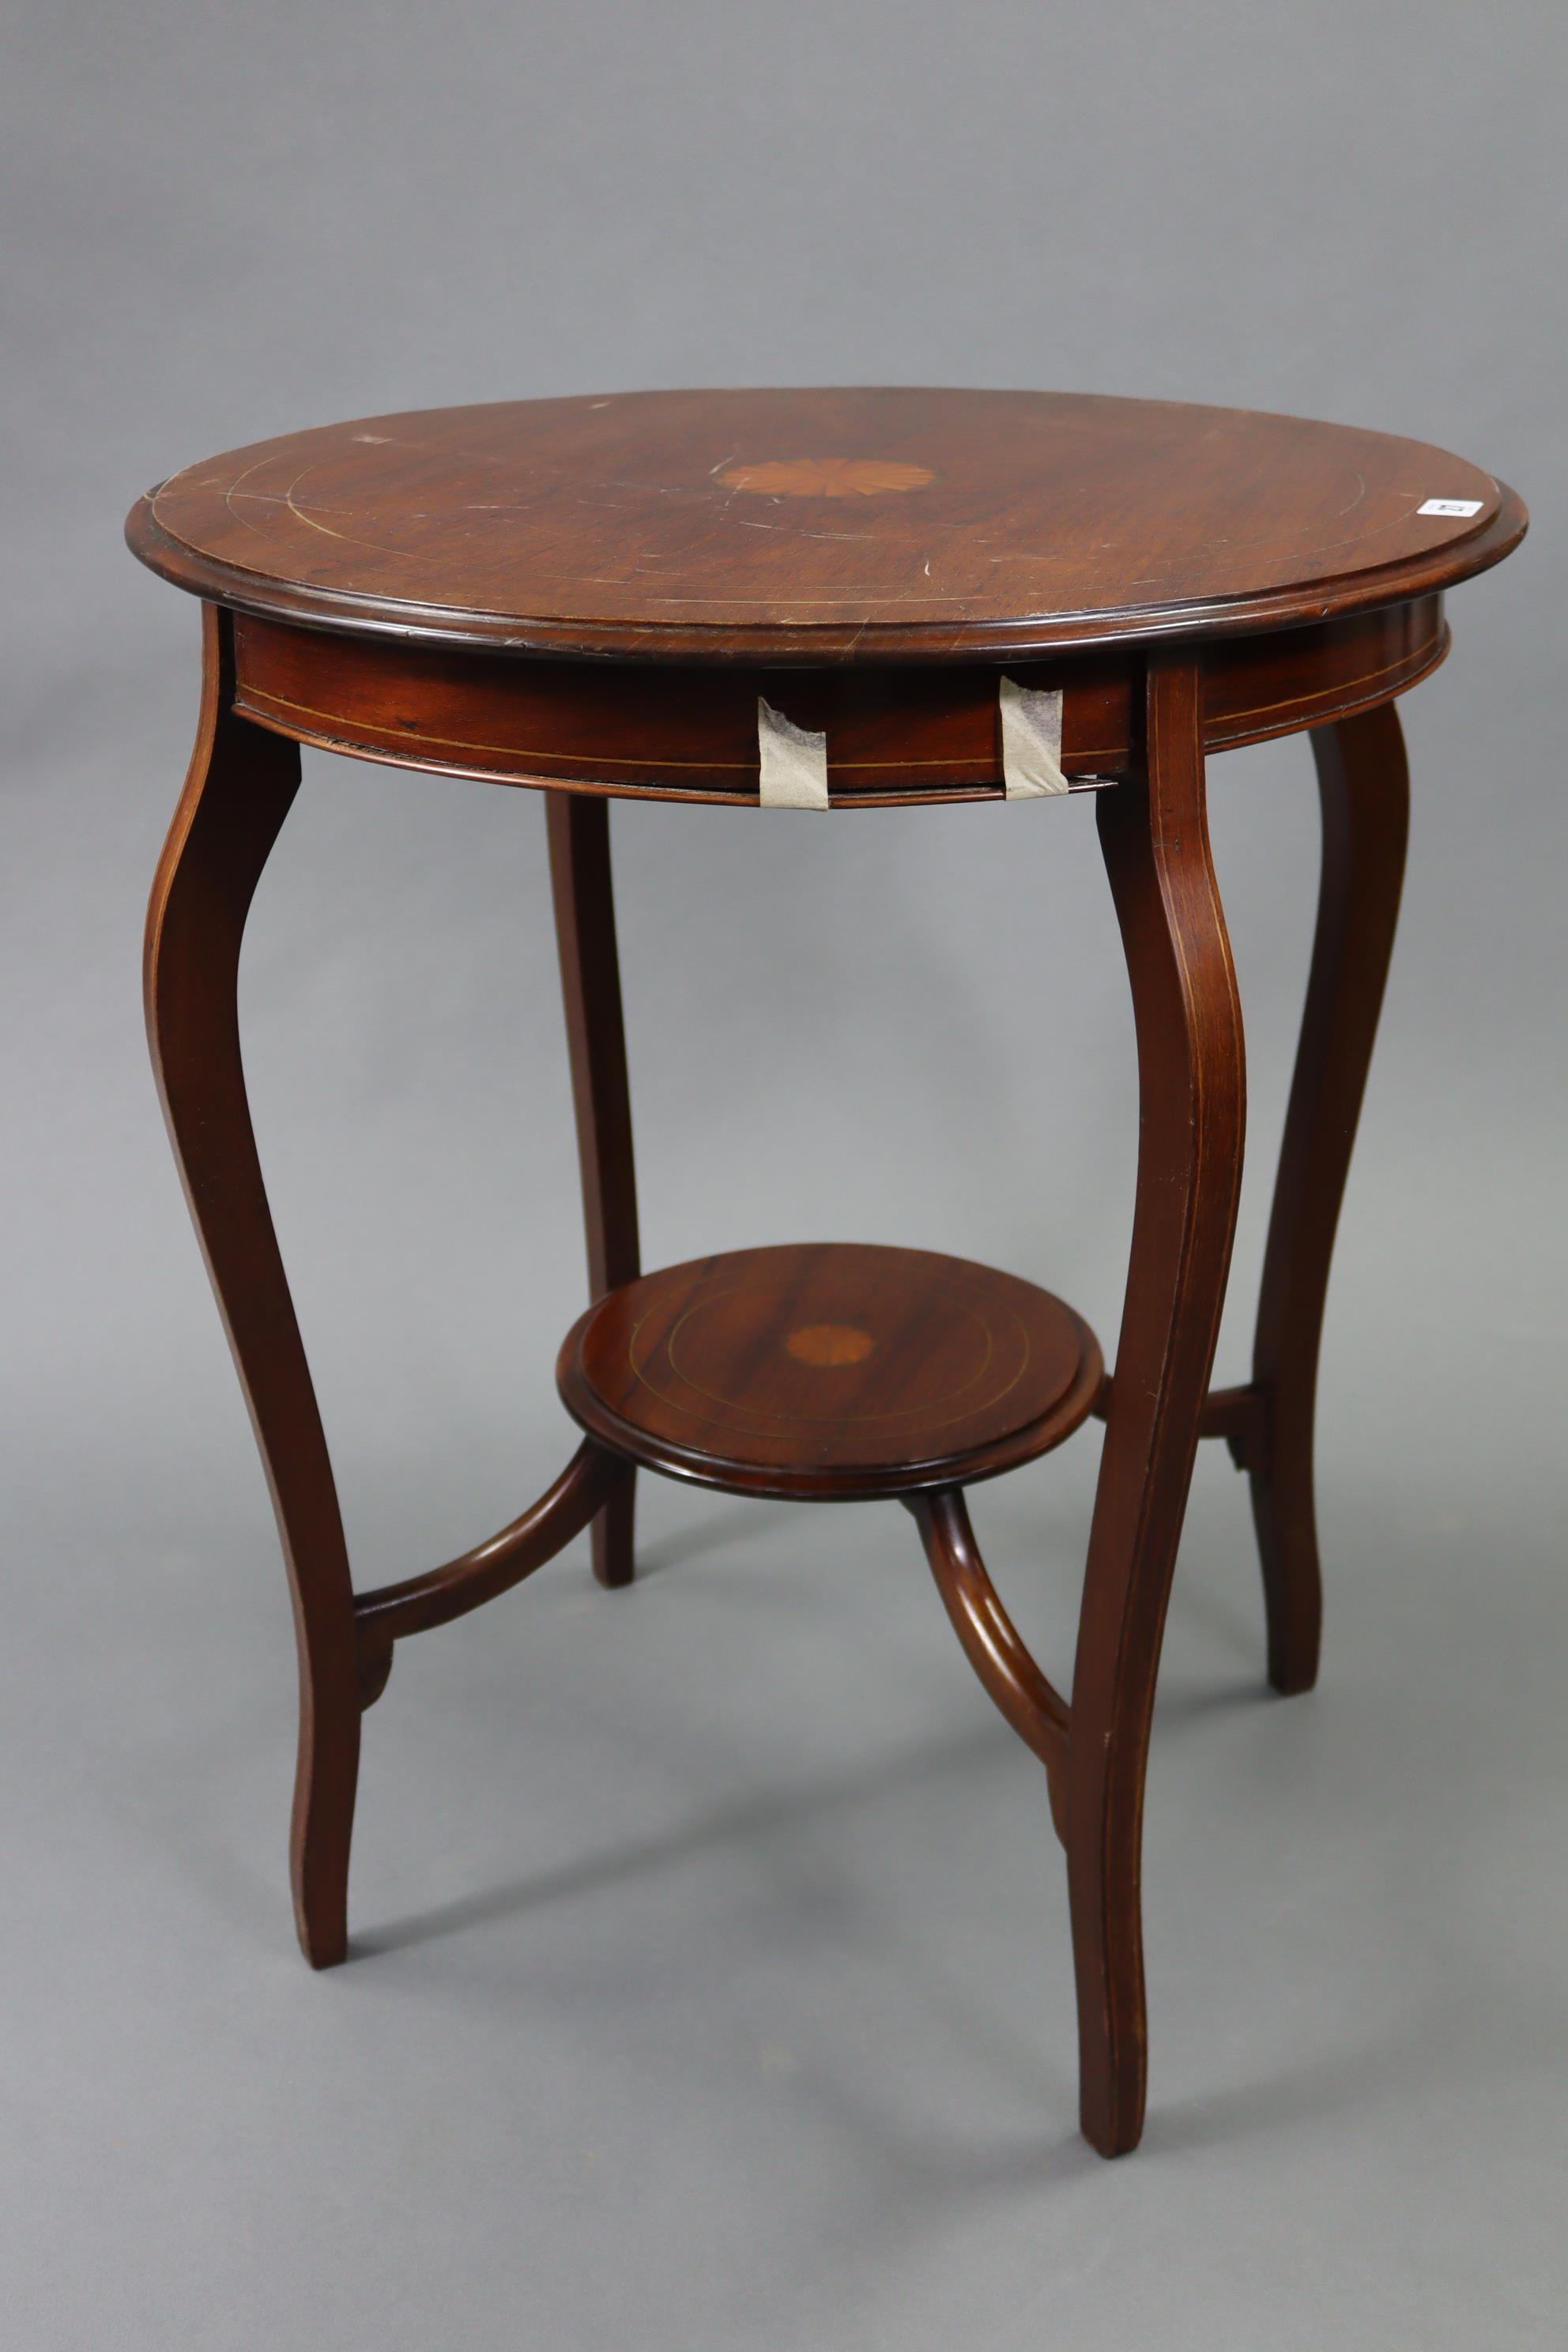 An Edwardian inlaid-mahogany circular two-tier occasional table on four slender cabriole legs, 24” - Image 3 of 9